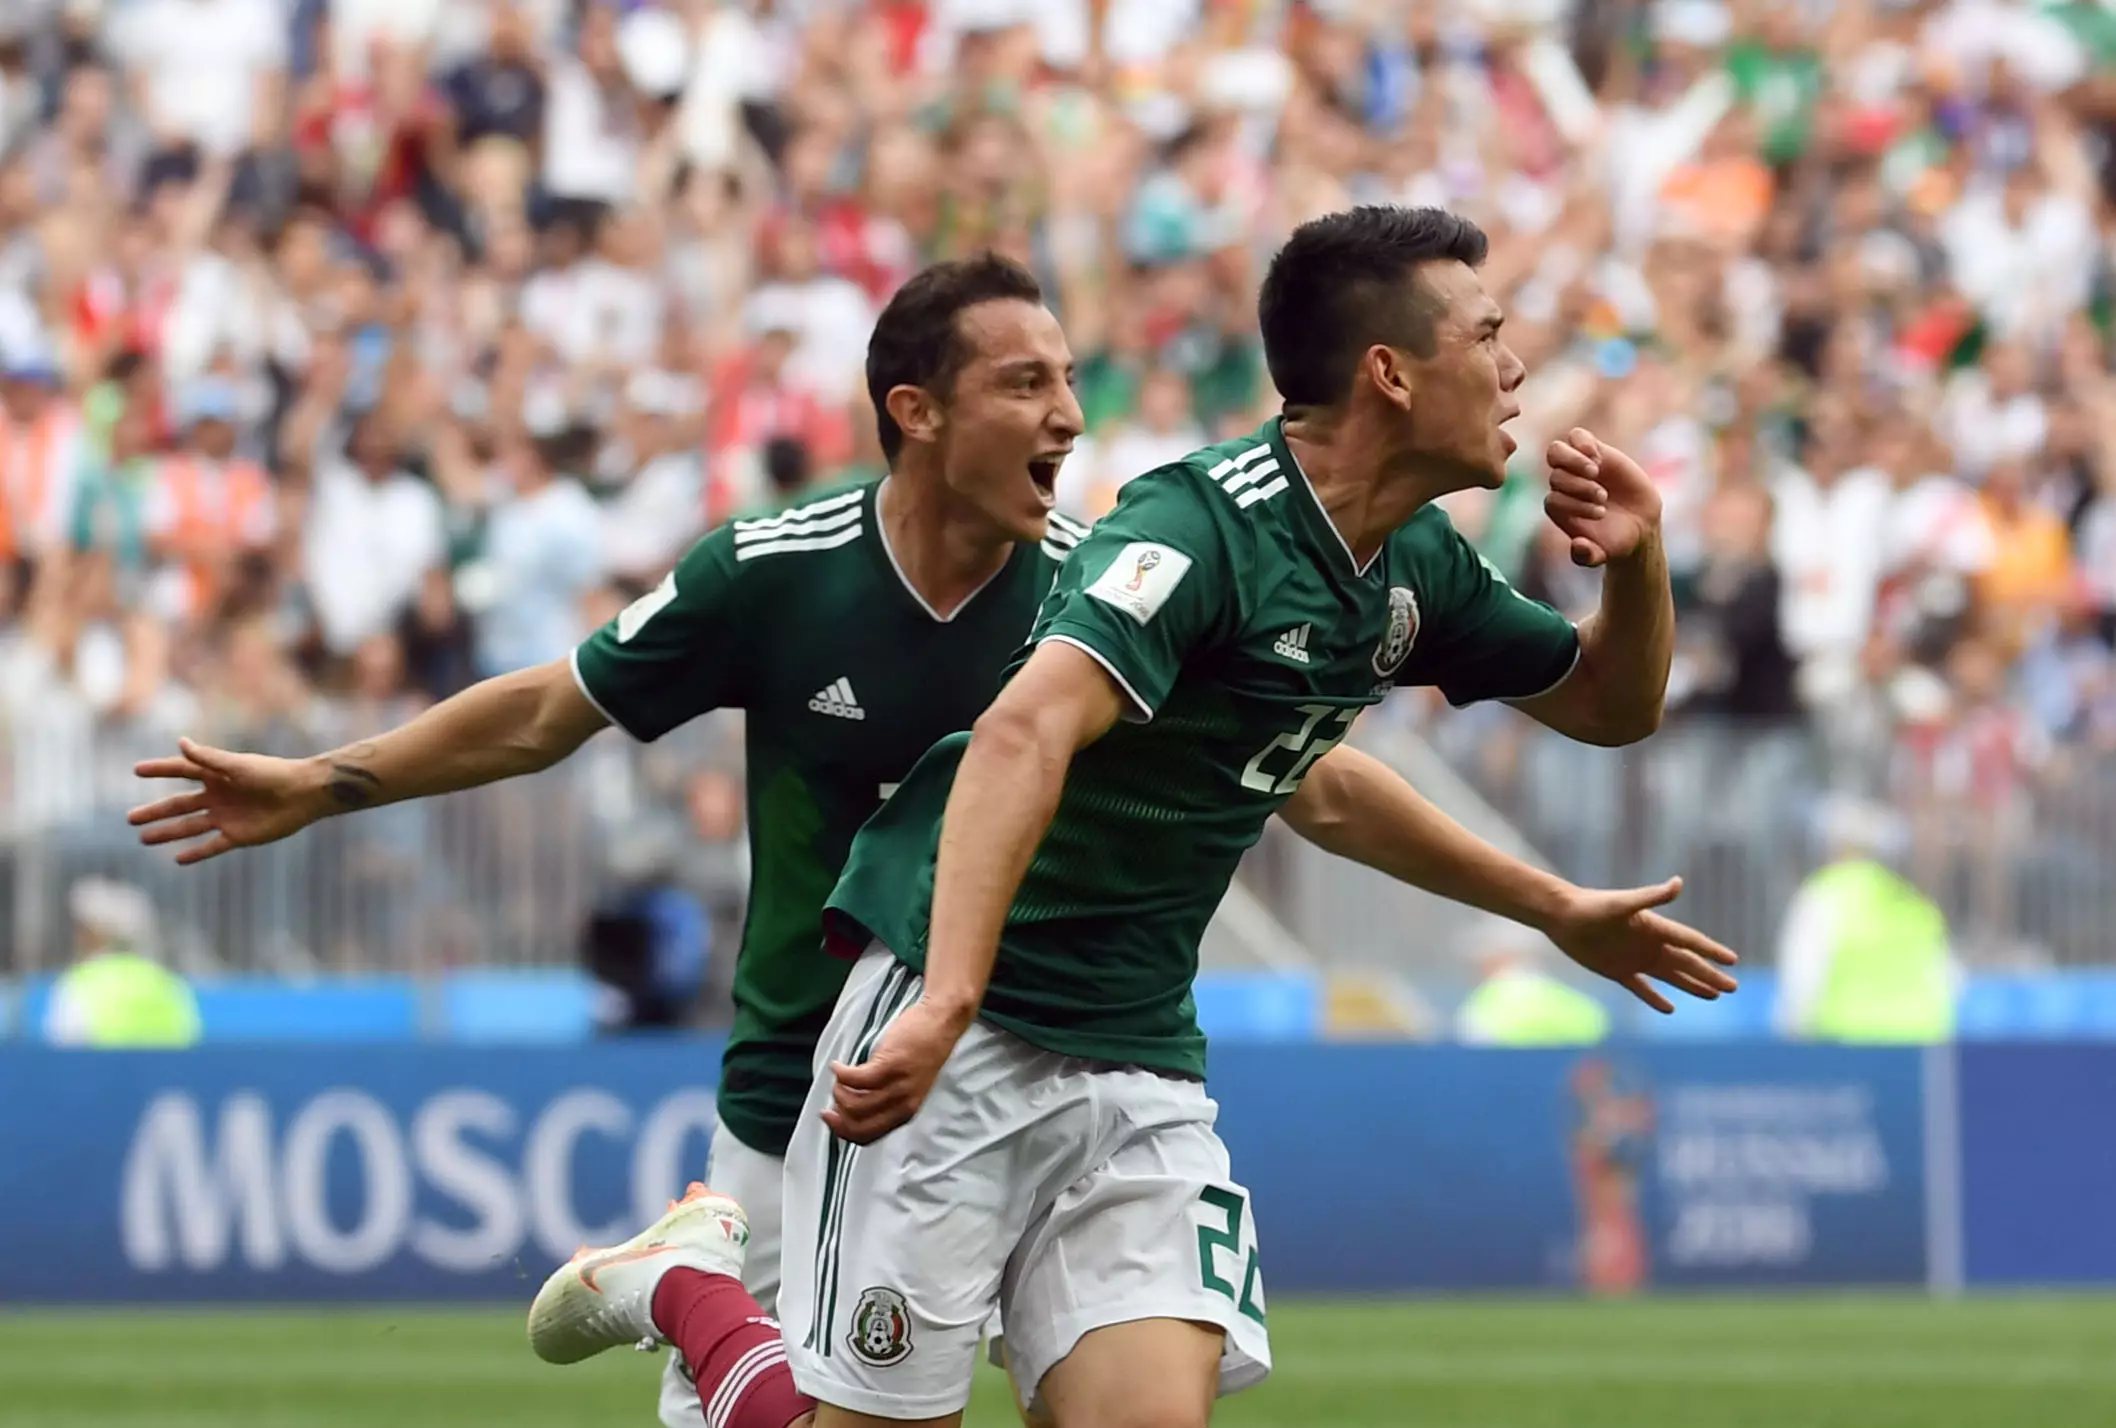 Lozano's goal secured a big shock. Image: PA Images